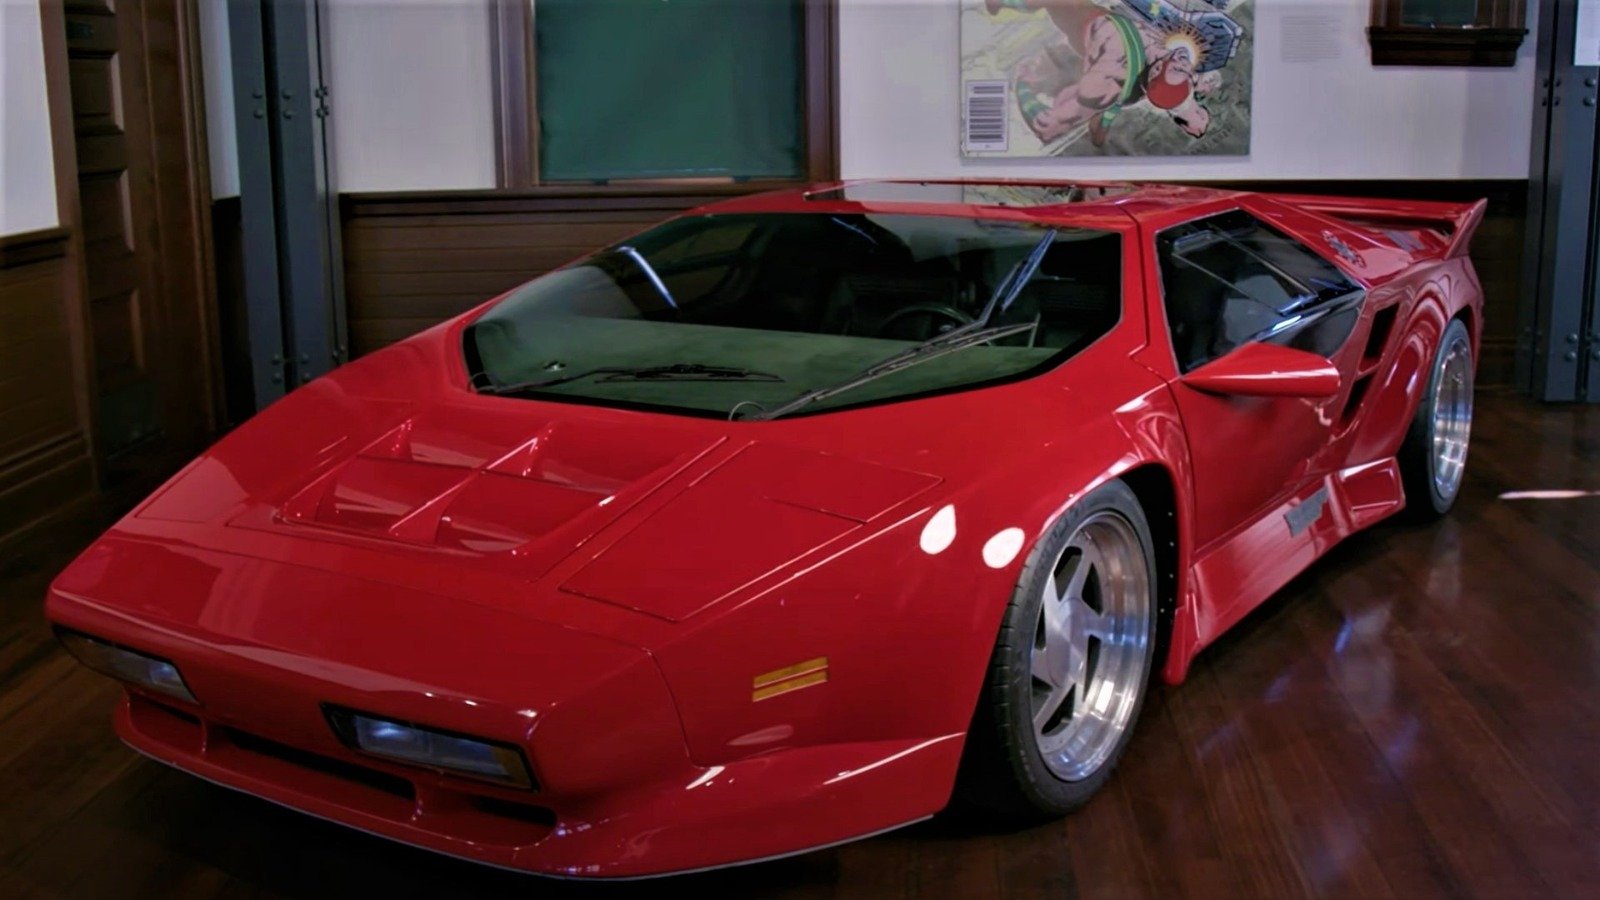 Why The Vector W8 Was One Of The Most Expensive Car Flops Of All Time